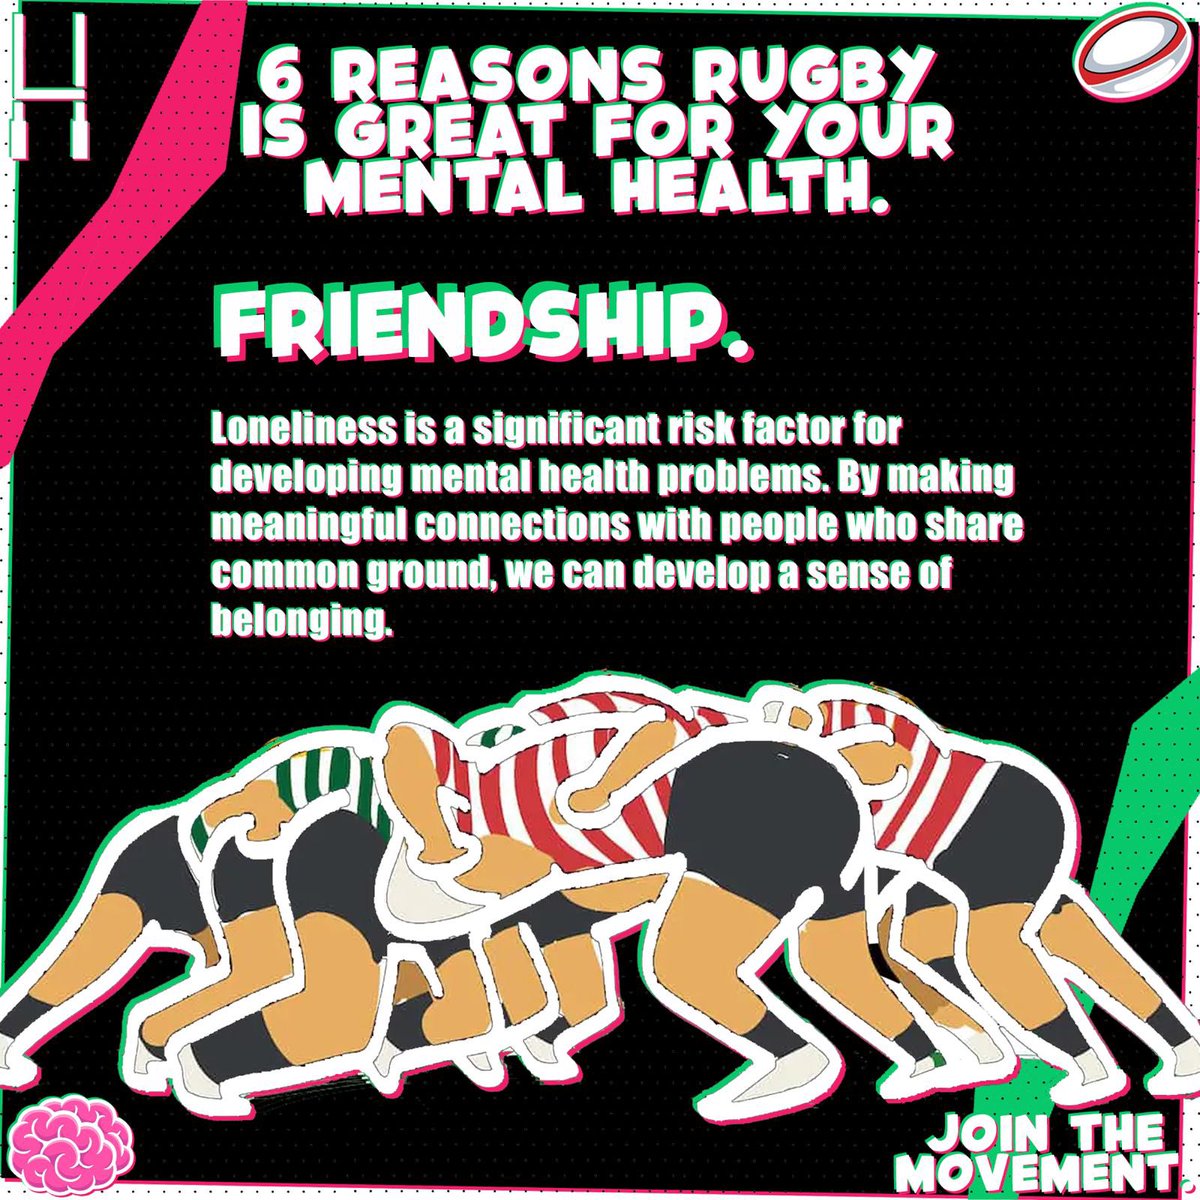 𝗙𝗥𝗜𝗘𝗡𝗗𝗦𝗛𝗜𝗣 💚 We all know that you can walk into any rugby club around the world, & you’ve instantly got 10 new mates. Not only that, but it provides immediate common ground by playing or following the same sport 🏉 #TackleTheStigma 🗣️